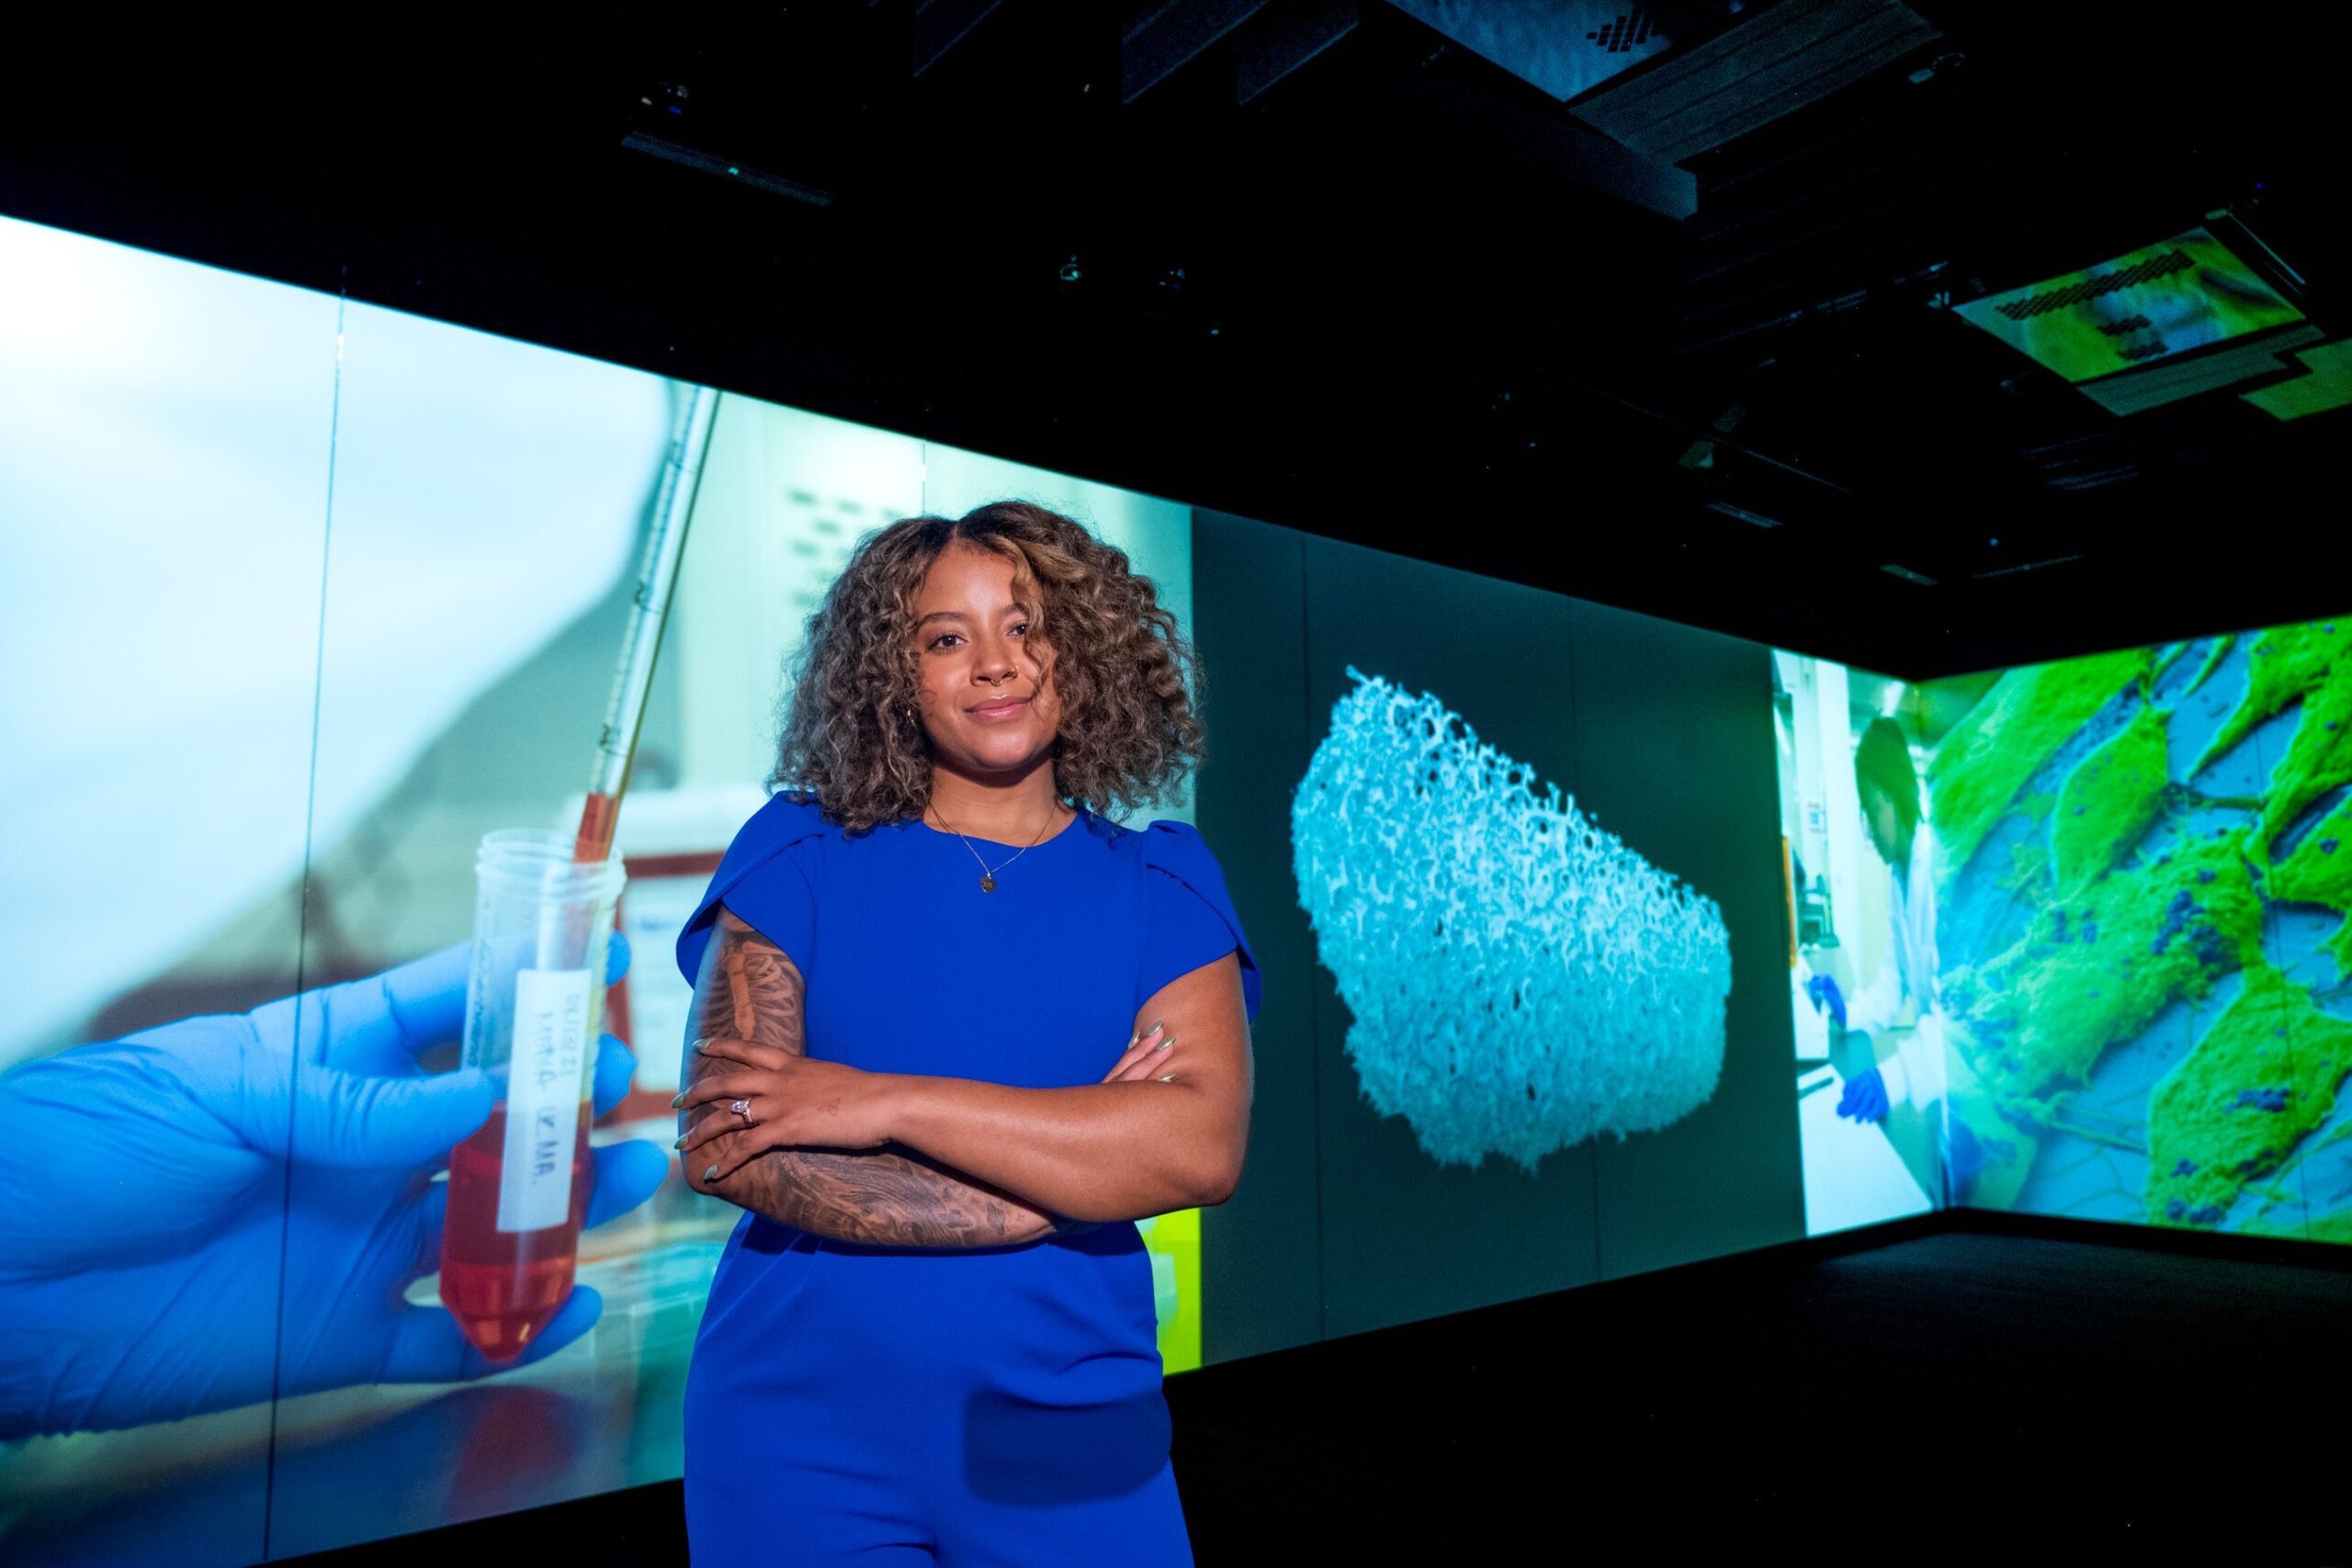 Mone’t Sawyer in the Steiin Luminary projecting her research imagery